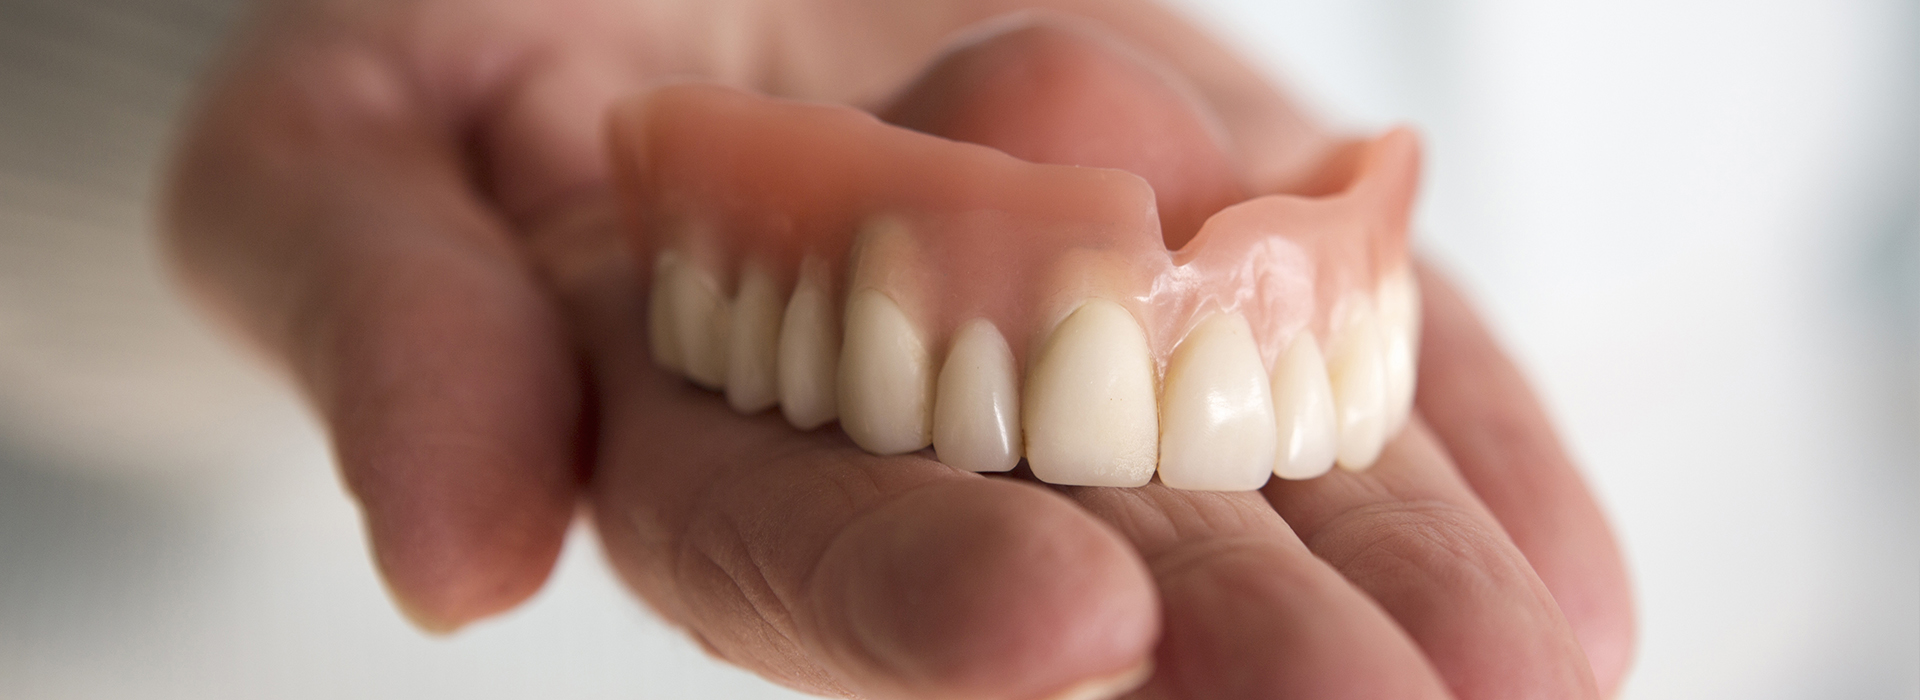 An individual holding a set of dentures, showcasing the upper and lower teeth.